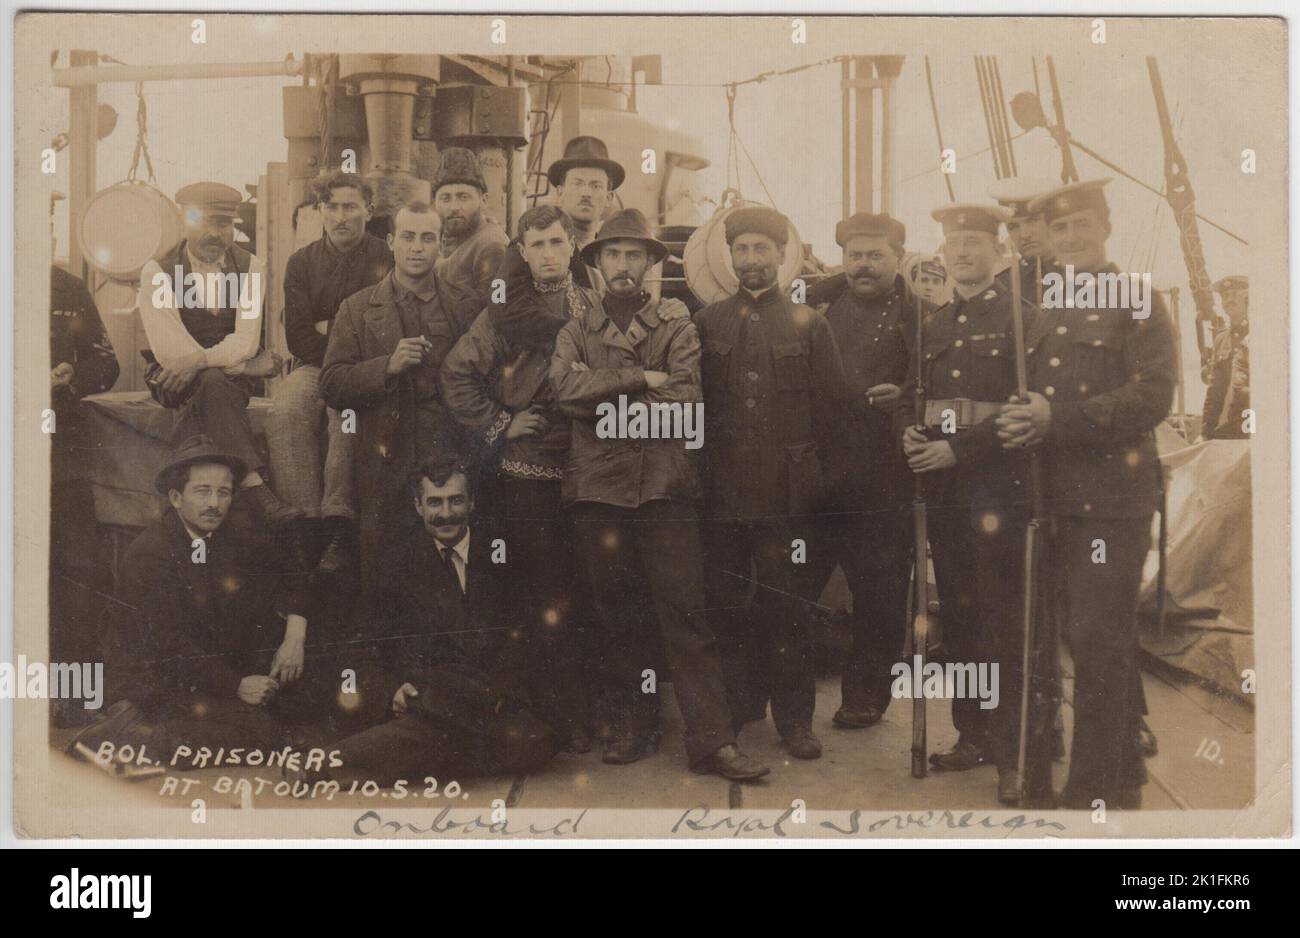 'Bolshevik prisoners at Batoum 10.5.20': photograph of Bolshevik or Communist prisoners on board British Navy battleship HMS Royal Sovereign in May 1920. British servicemen (Royal Marines?) are standing next to the prisoners with fixed bayonets. The HMS Royal Sovereign was at Batoum (now Batumi in Georgia) as part of British involvement in the Russian Civil War following the 1917 Bolshevik Revolution. The prisoners are in a range of clothing - from leather jackets to an embroidered traditional style shirt Stock Photo